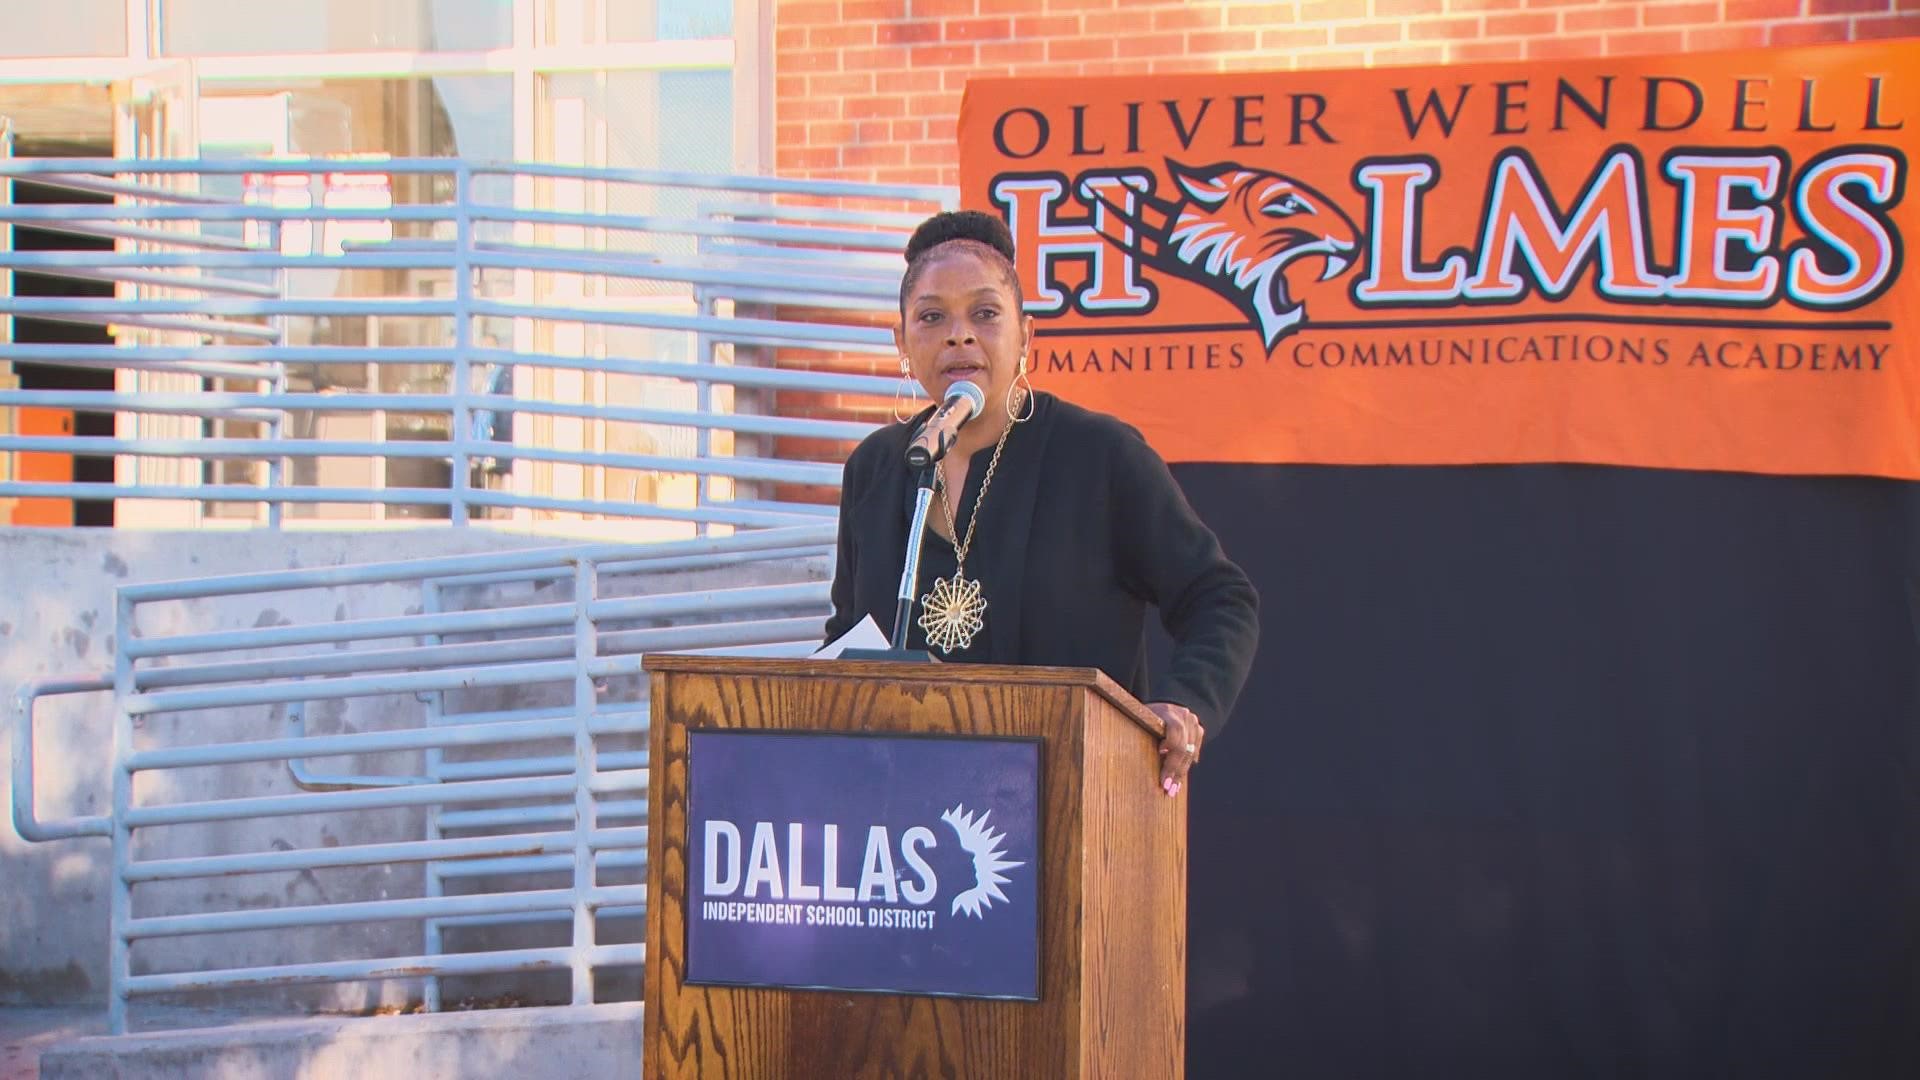 A new middle school campus in Oak Cliff will be named after former congressman and civil rights activist John Lewis.